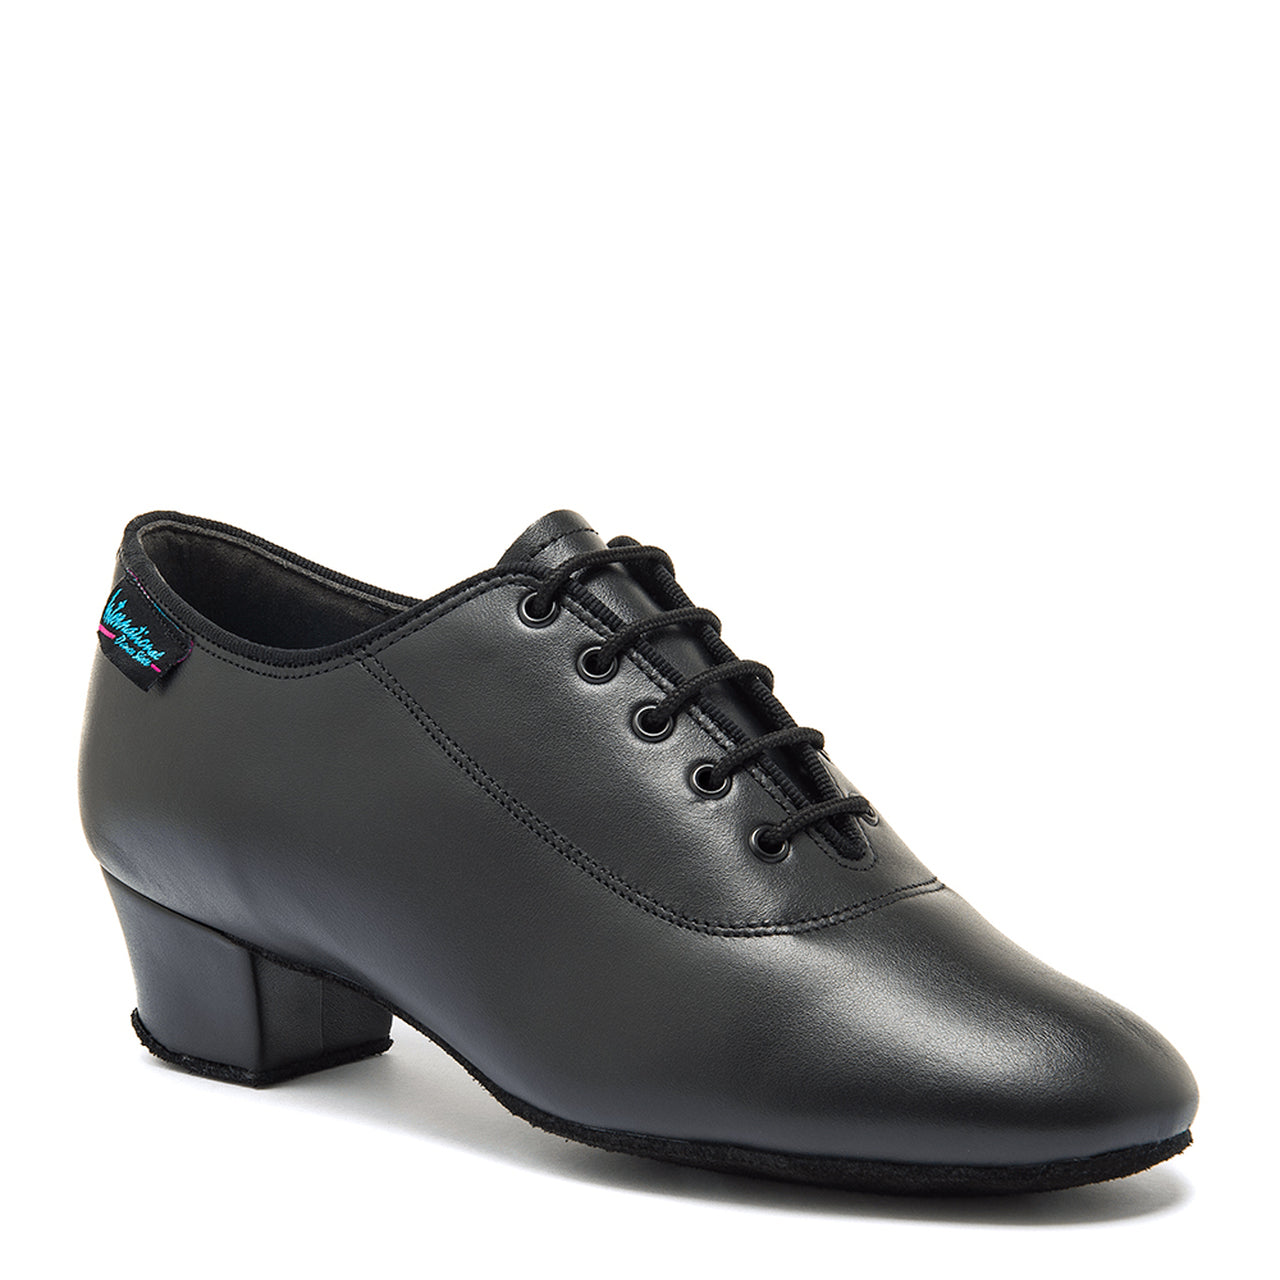 International Dance Shoes IDS Heather Full-Sole Black Calf Teaching and Practice Shoe in Stock